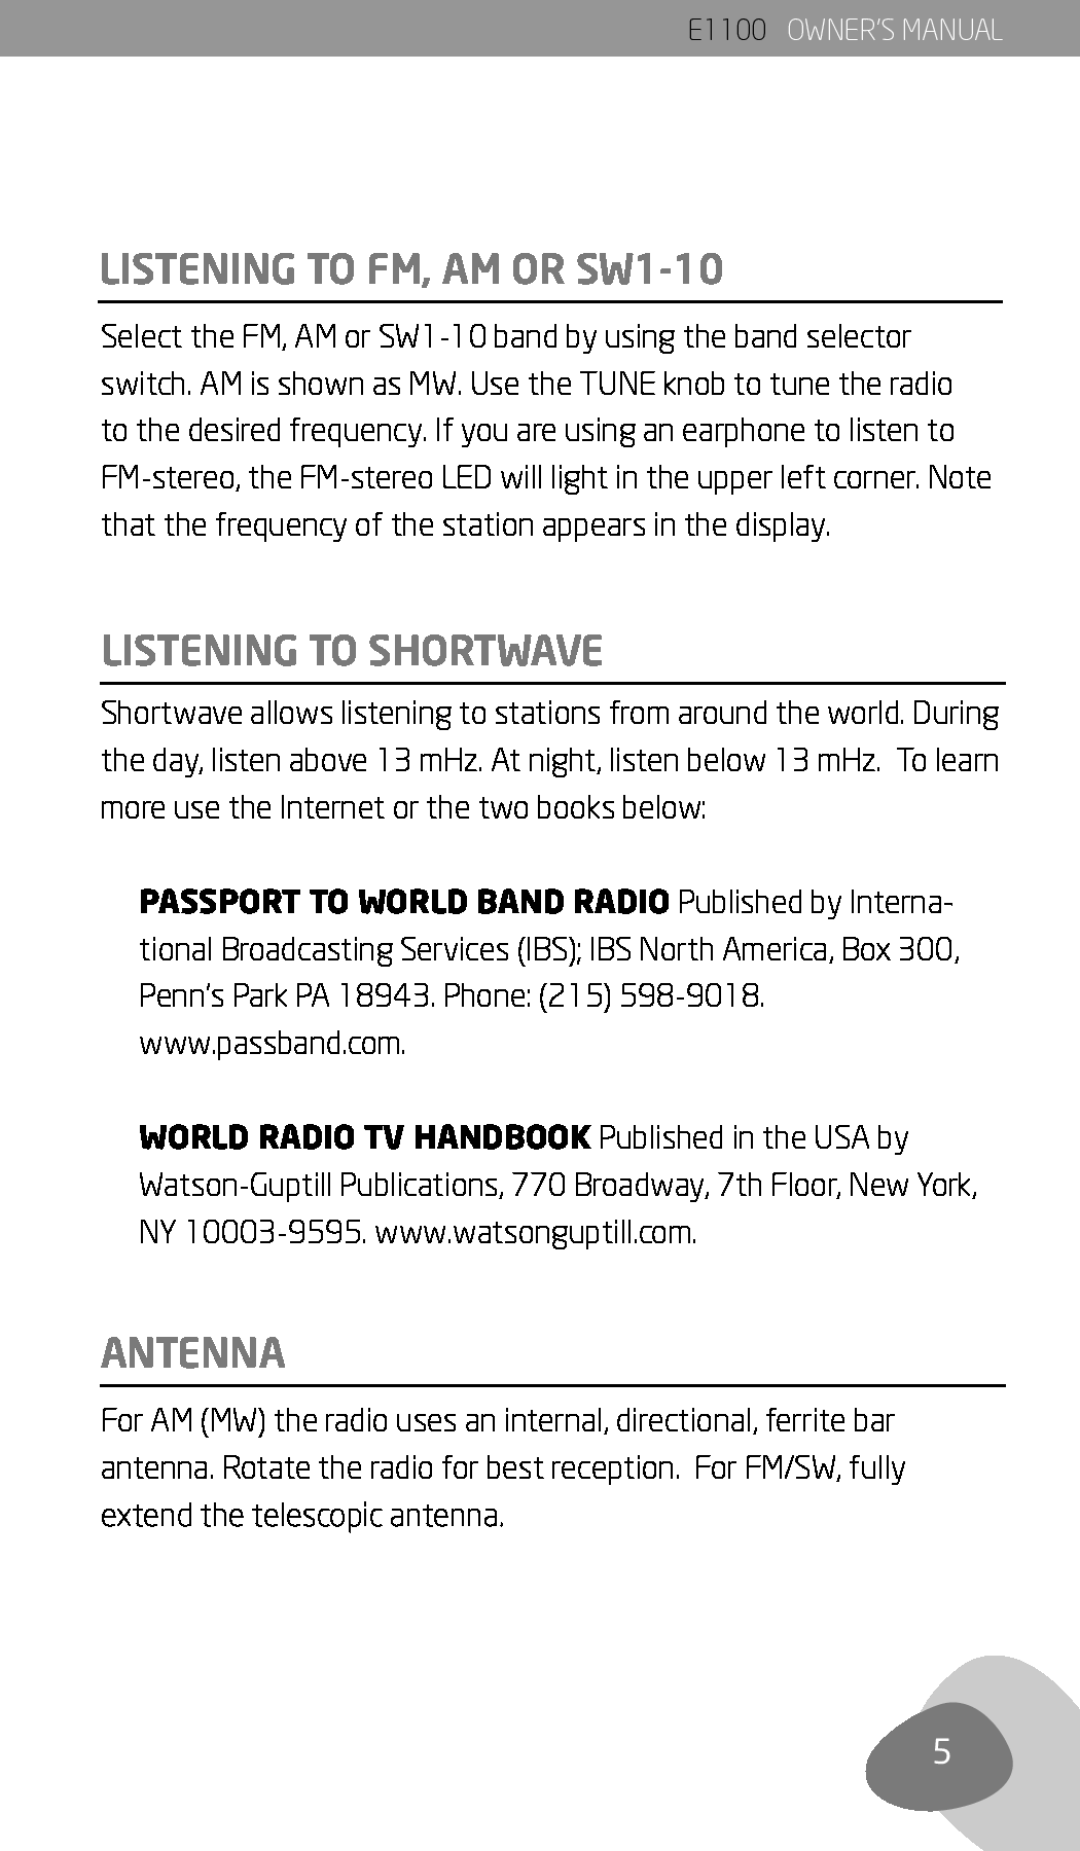 Eton E1100 owner manual LISTENING TO FM, AM OR SW1-10, Listening To Shortwave, Antenna 